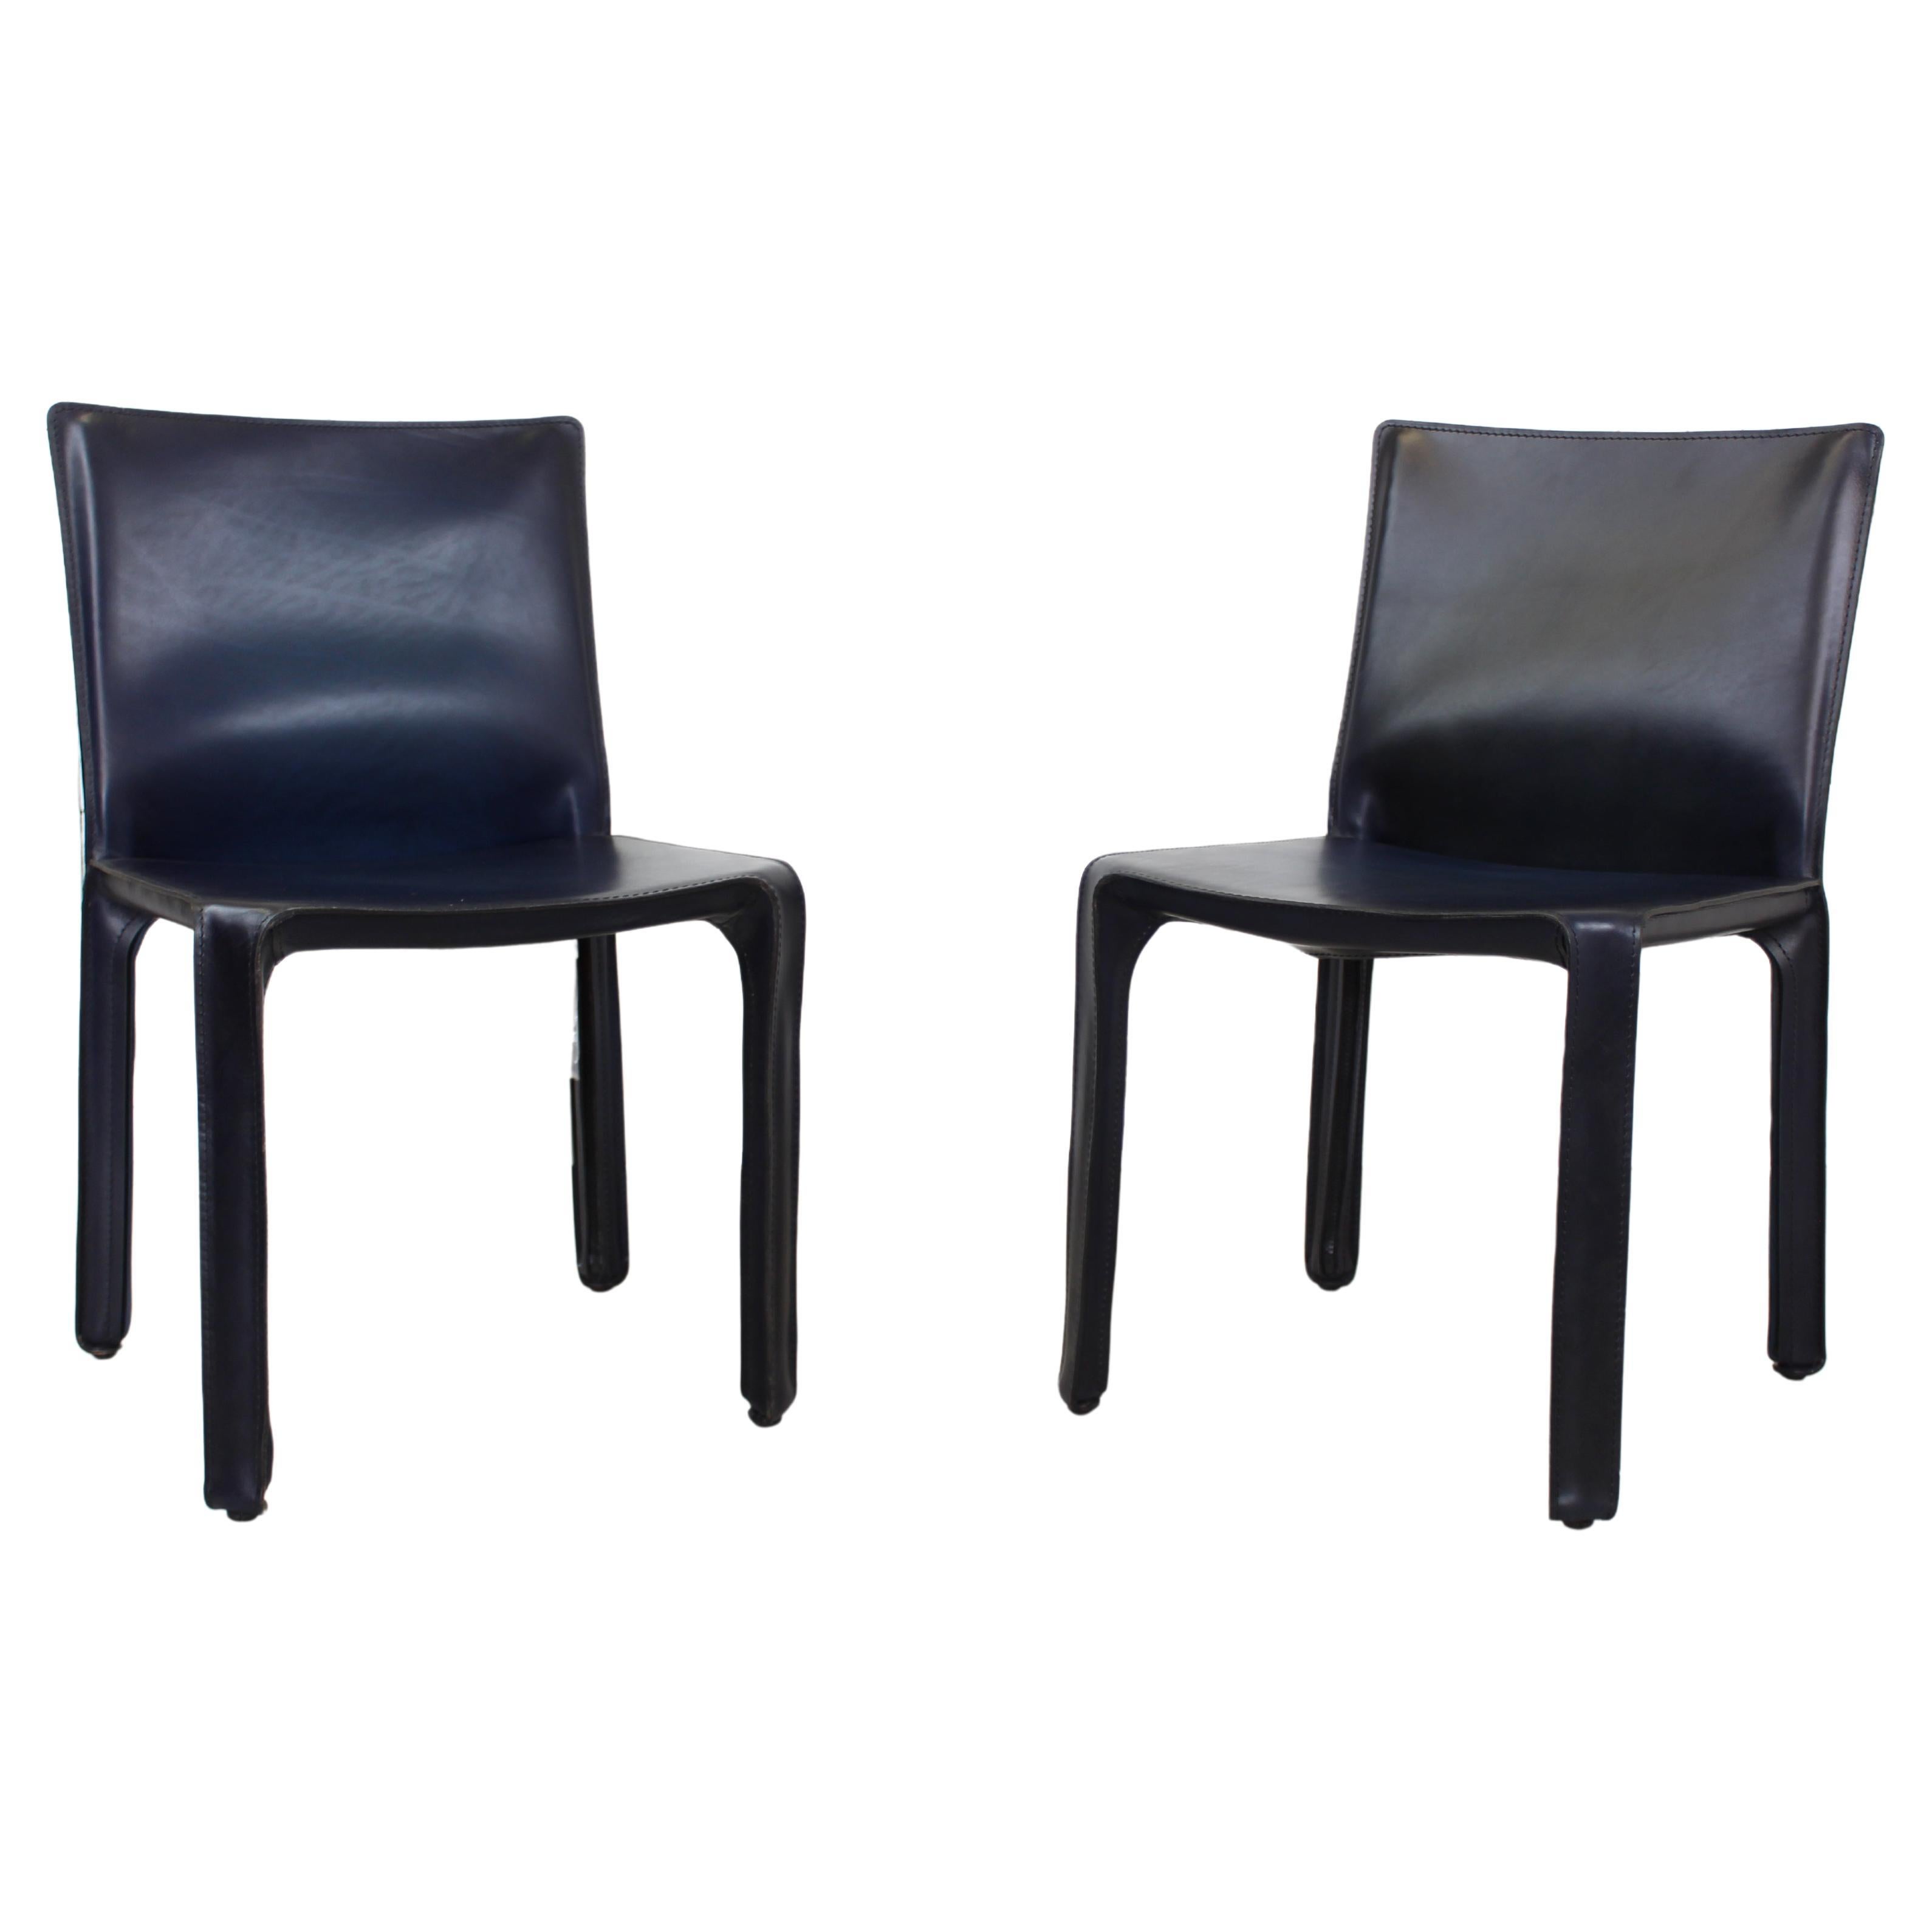 Cab 412 chairs by Mario Bellini for Cassina For Sale